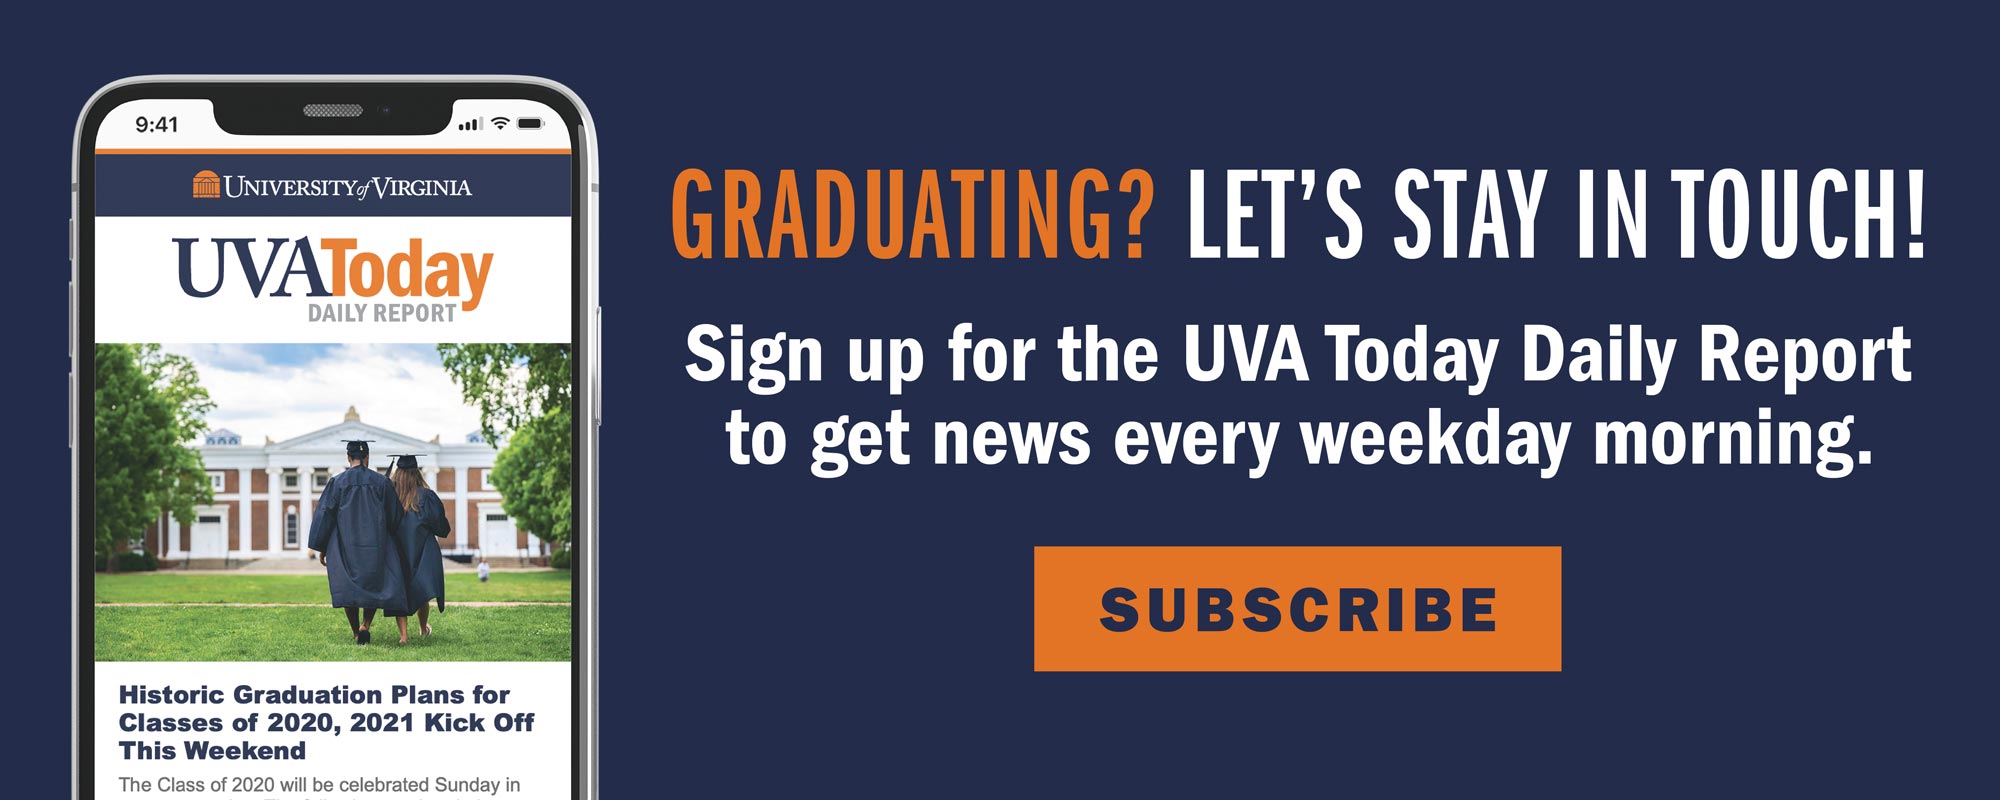 Graduating? Let’s stay in touch! Sign up for the UVA Today Daily Report to get news every weekday morning. Subscribe.